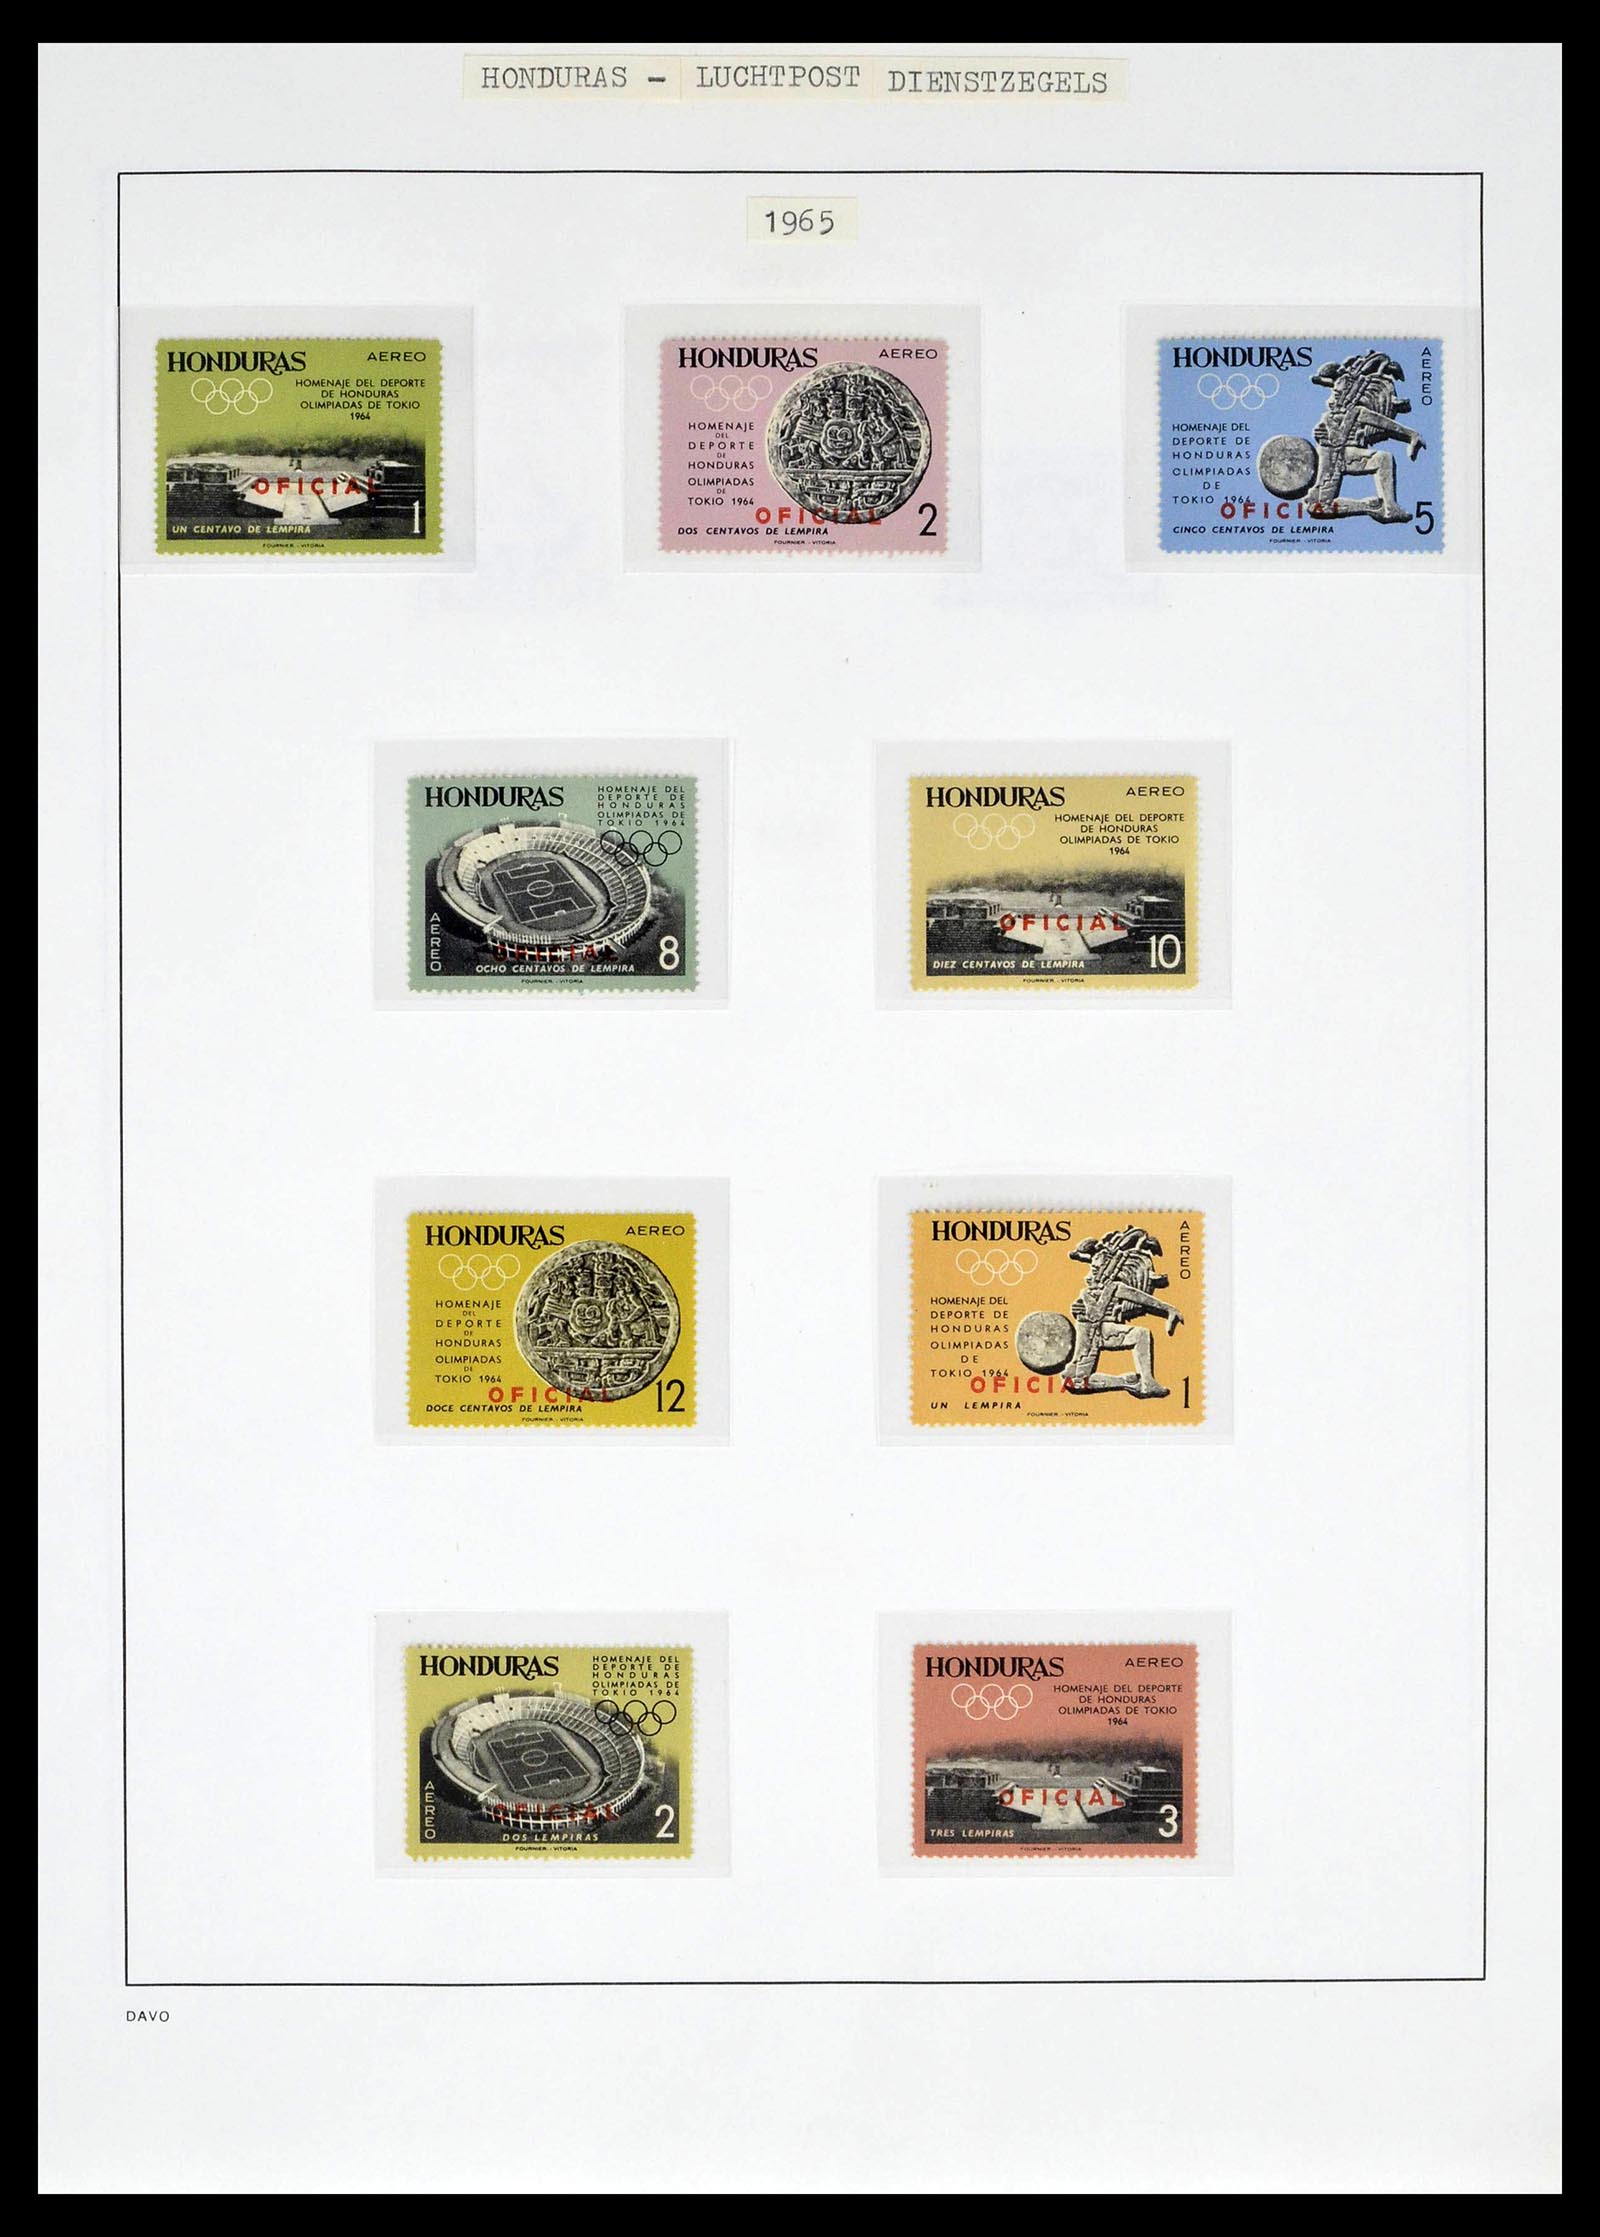 39404 0042 - Stamp collection 39404 Honduras service stamps 1890-1974.